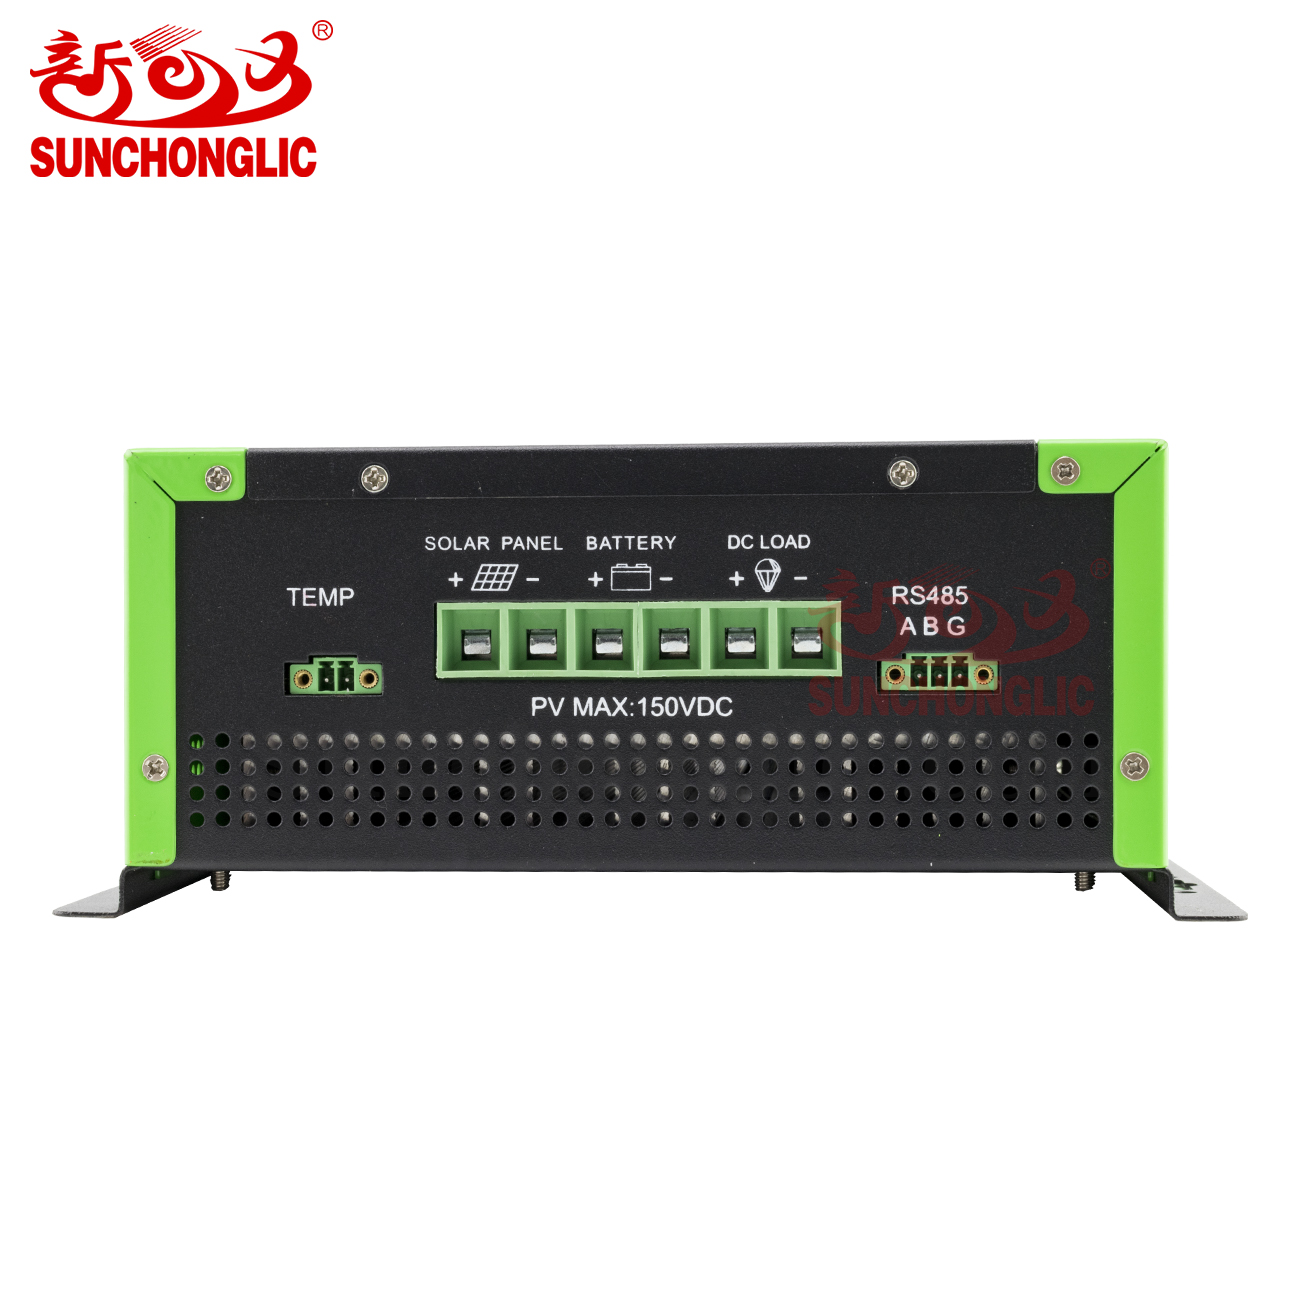 MPPT Solar Charge Controller - FT-MP-60A